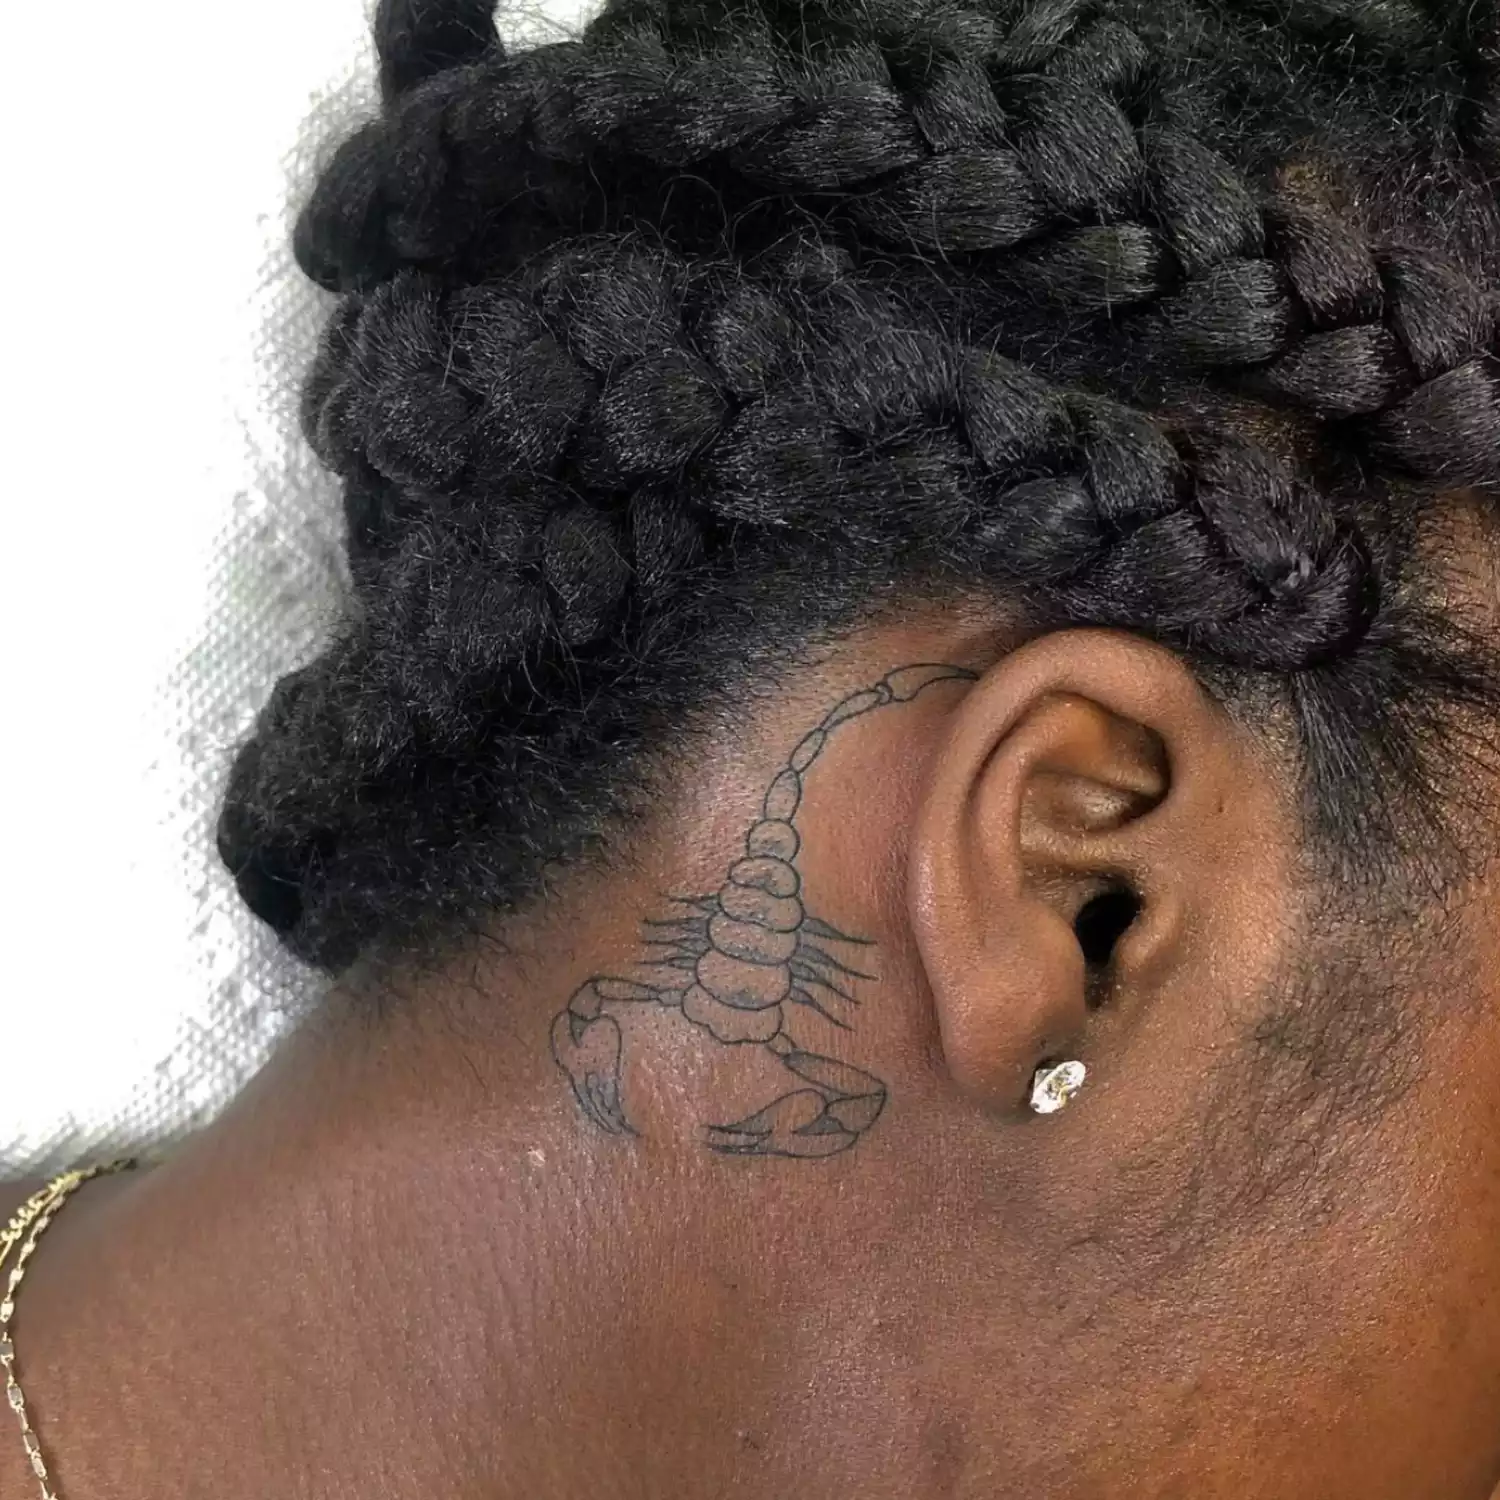 zoomed-in photo of person with scorpion tattoo behind the ear